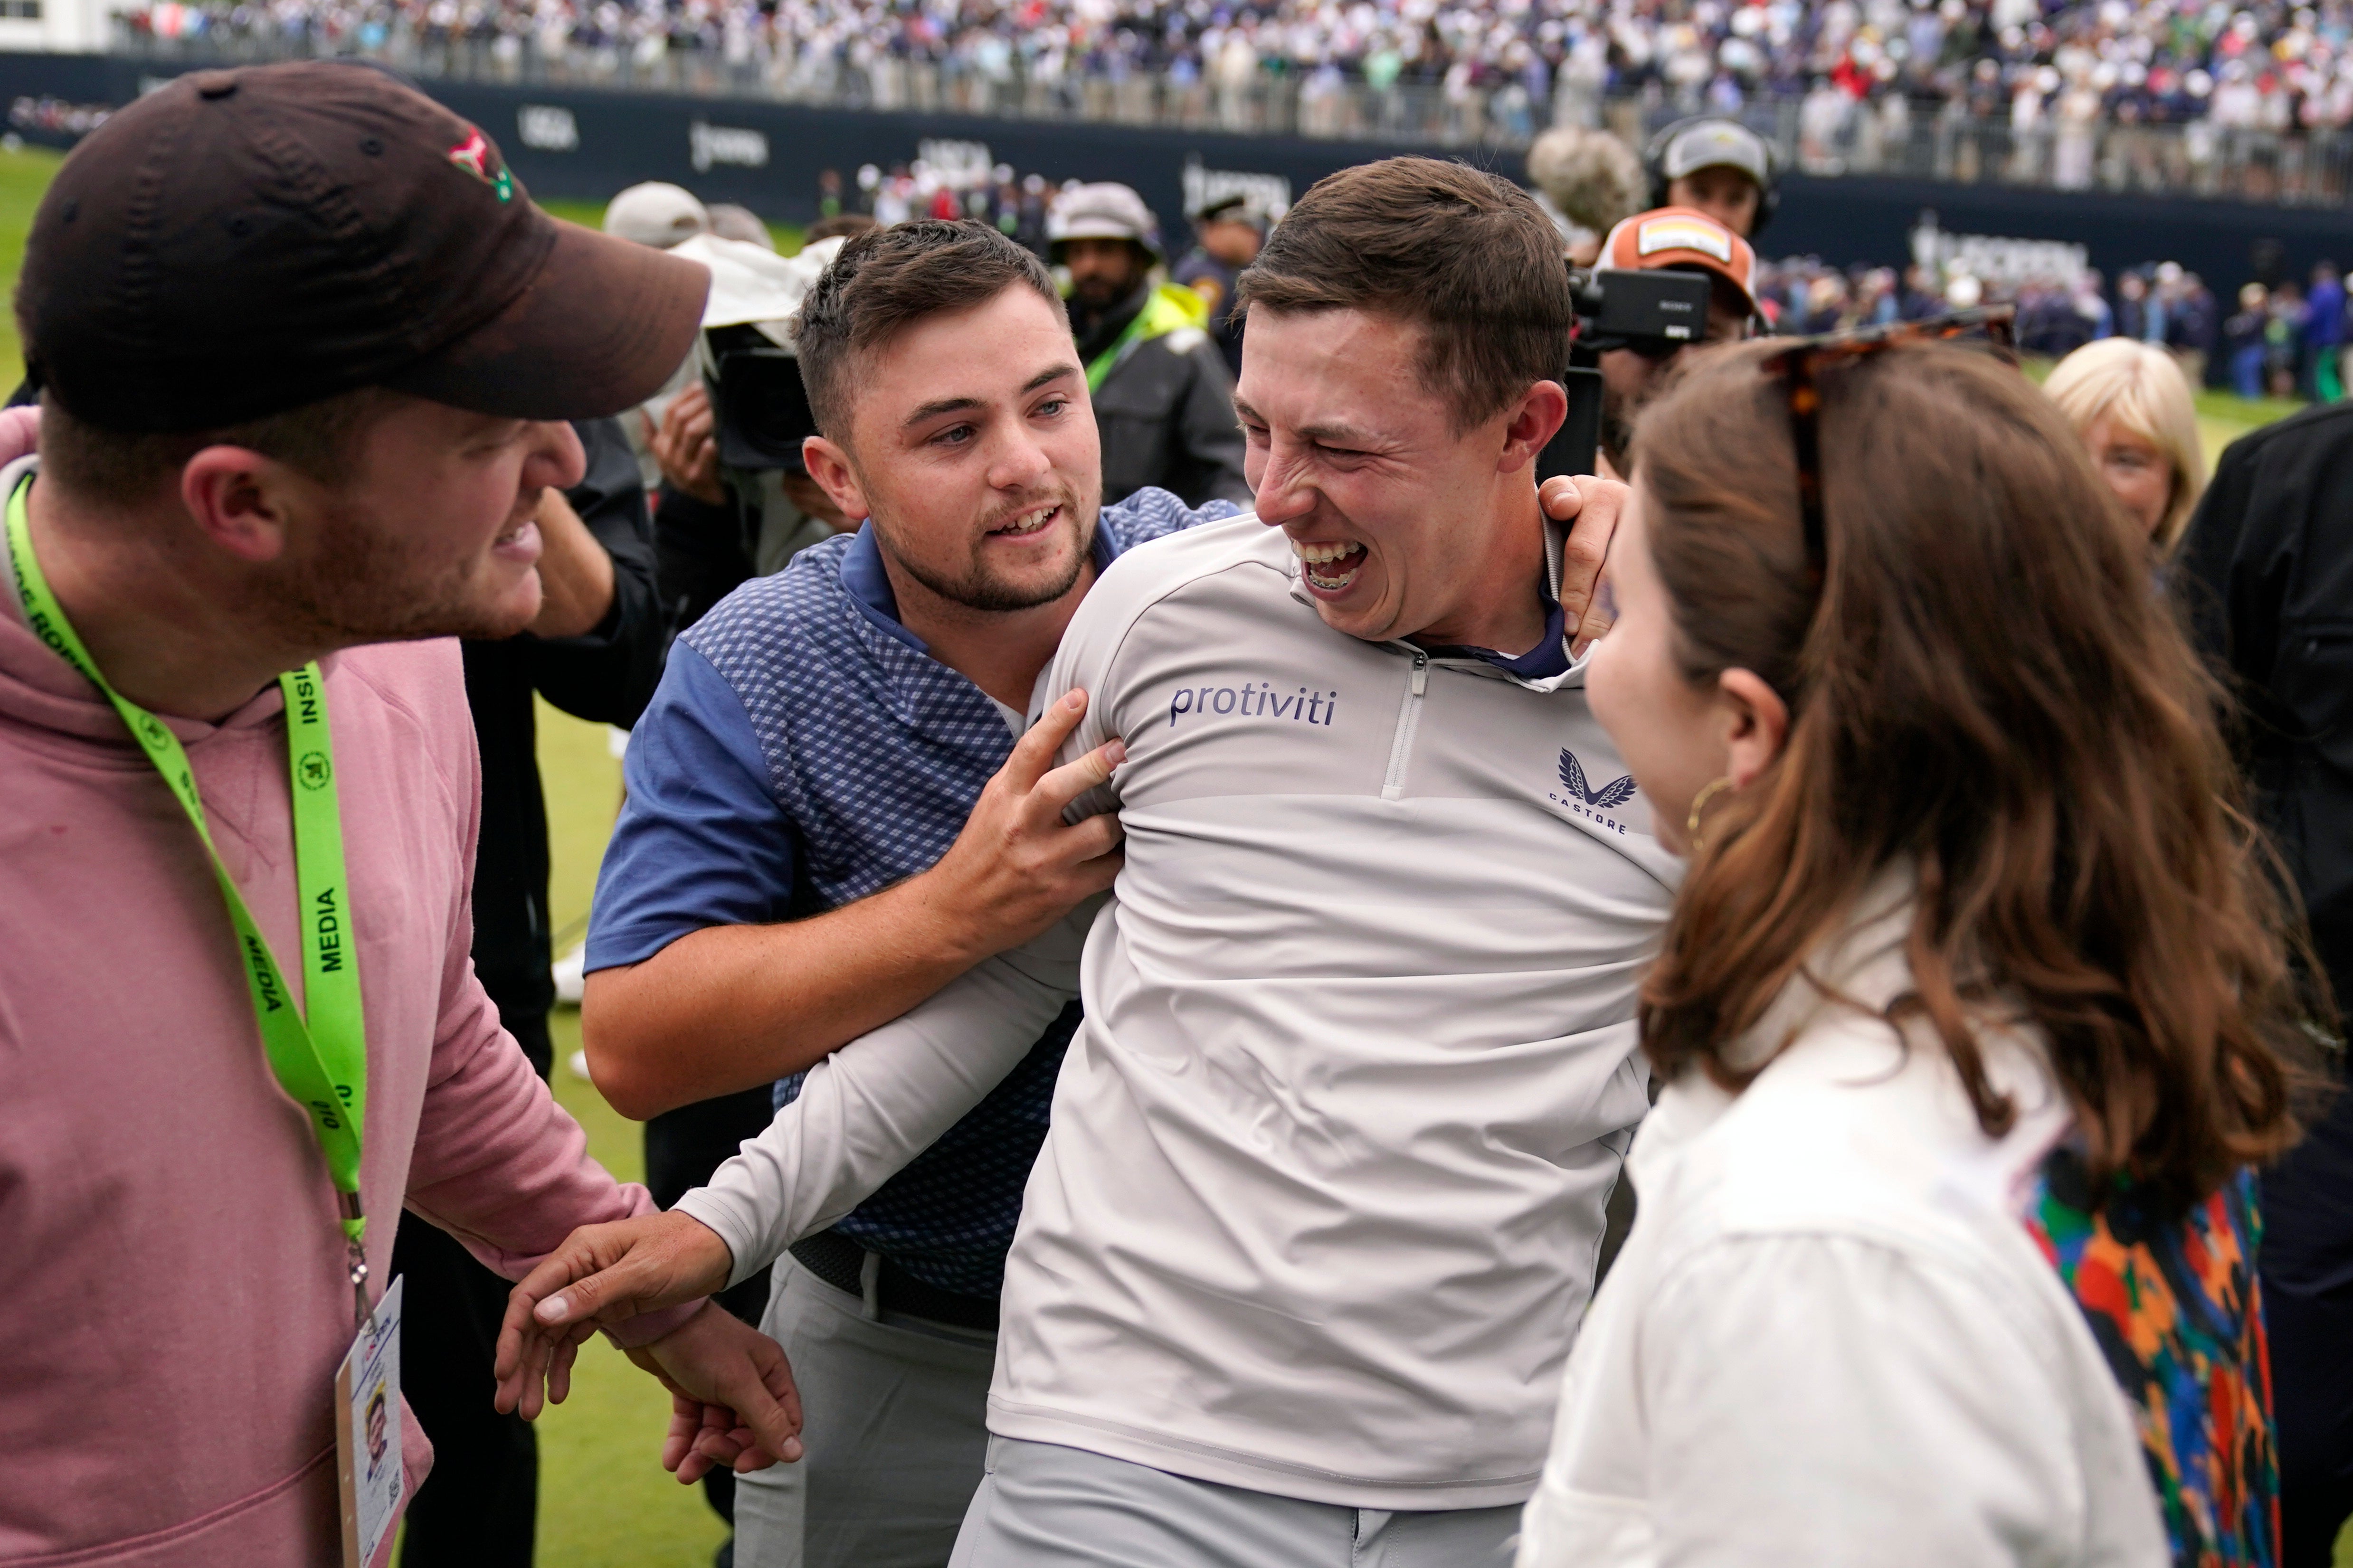 Matt Fitzpatrick celebrated with his brother Alex after winning the US Open at Brookline (Charles Krupa/AP/PA)